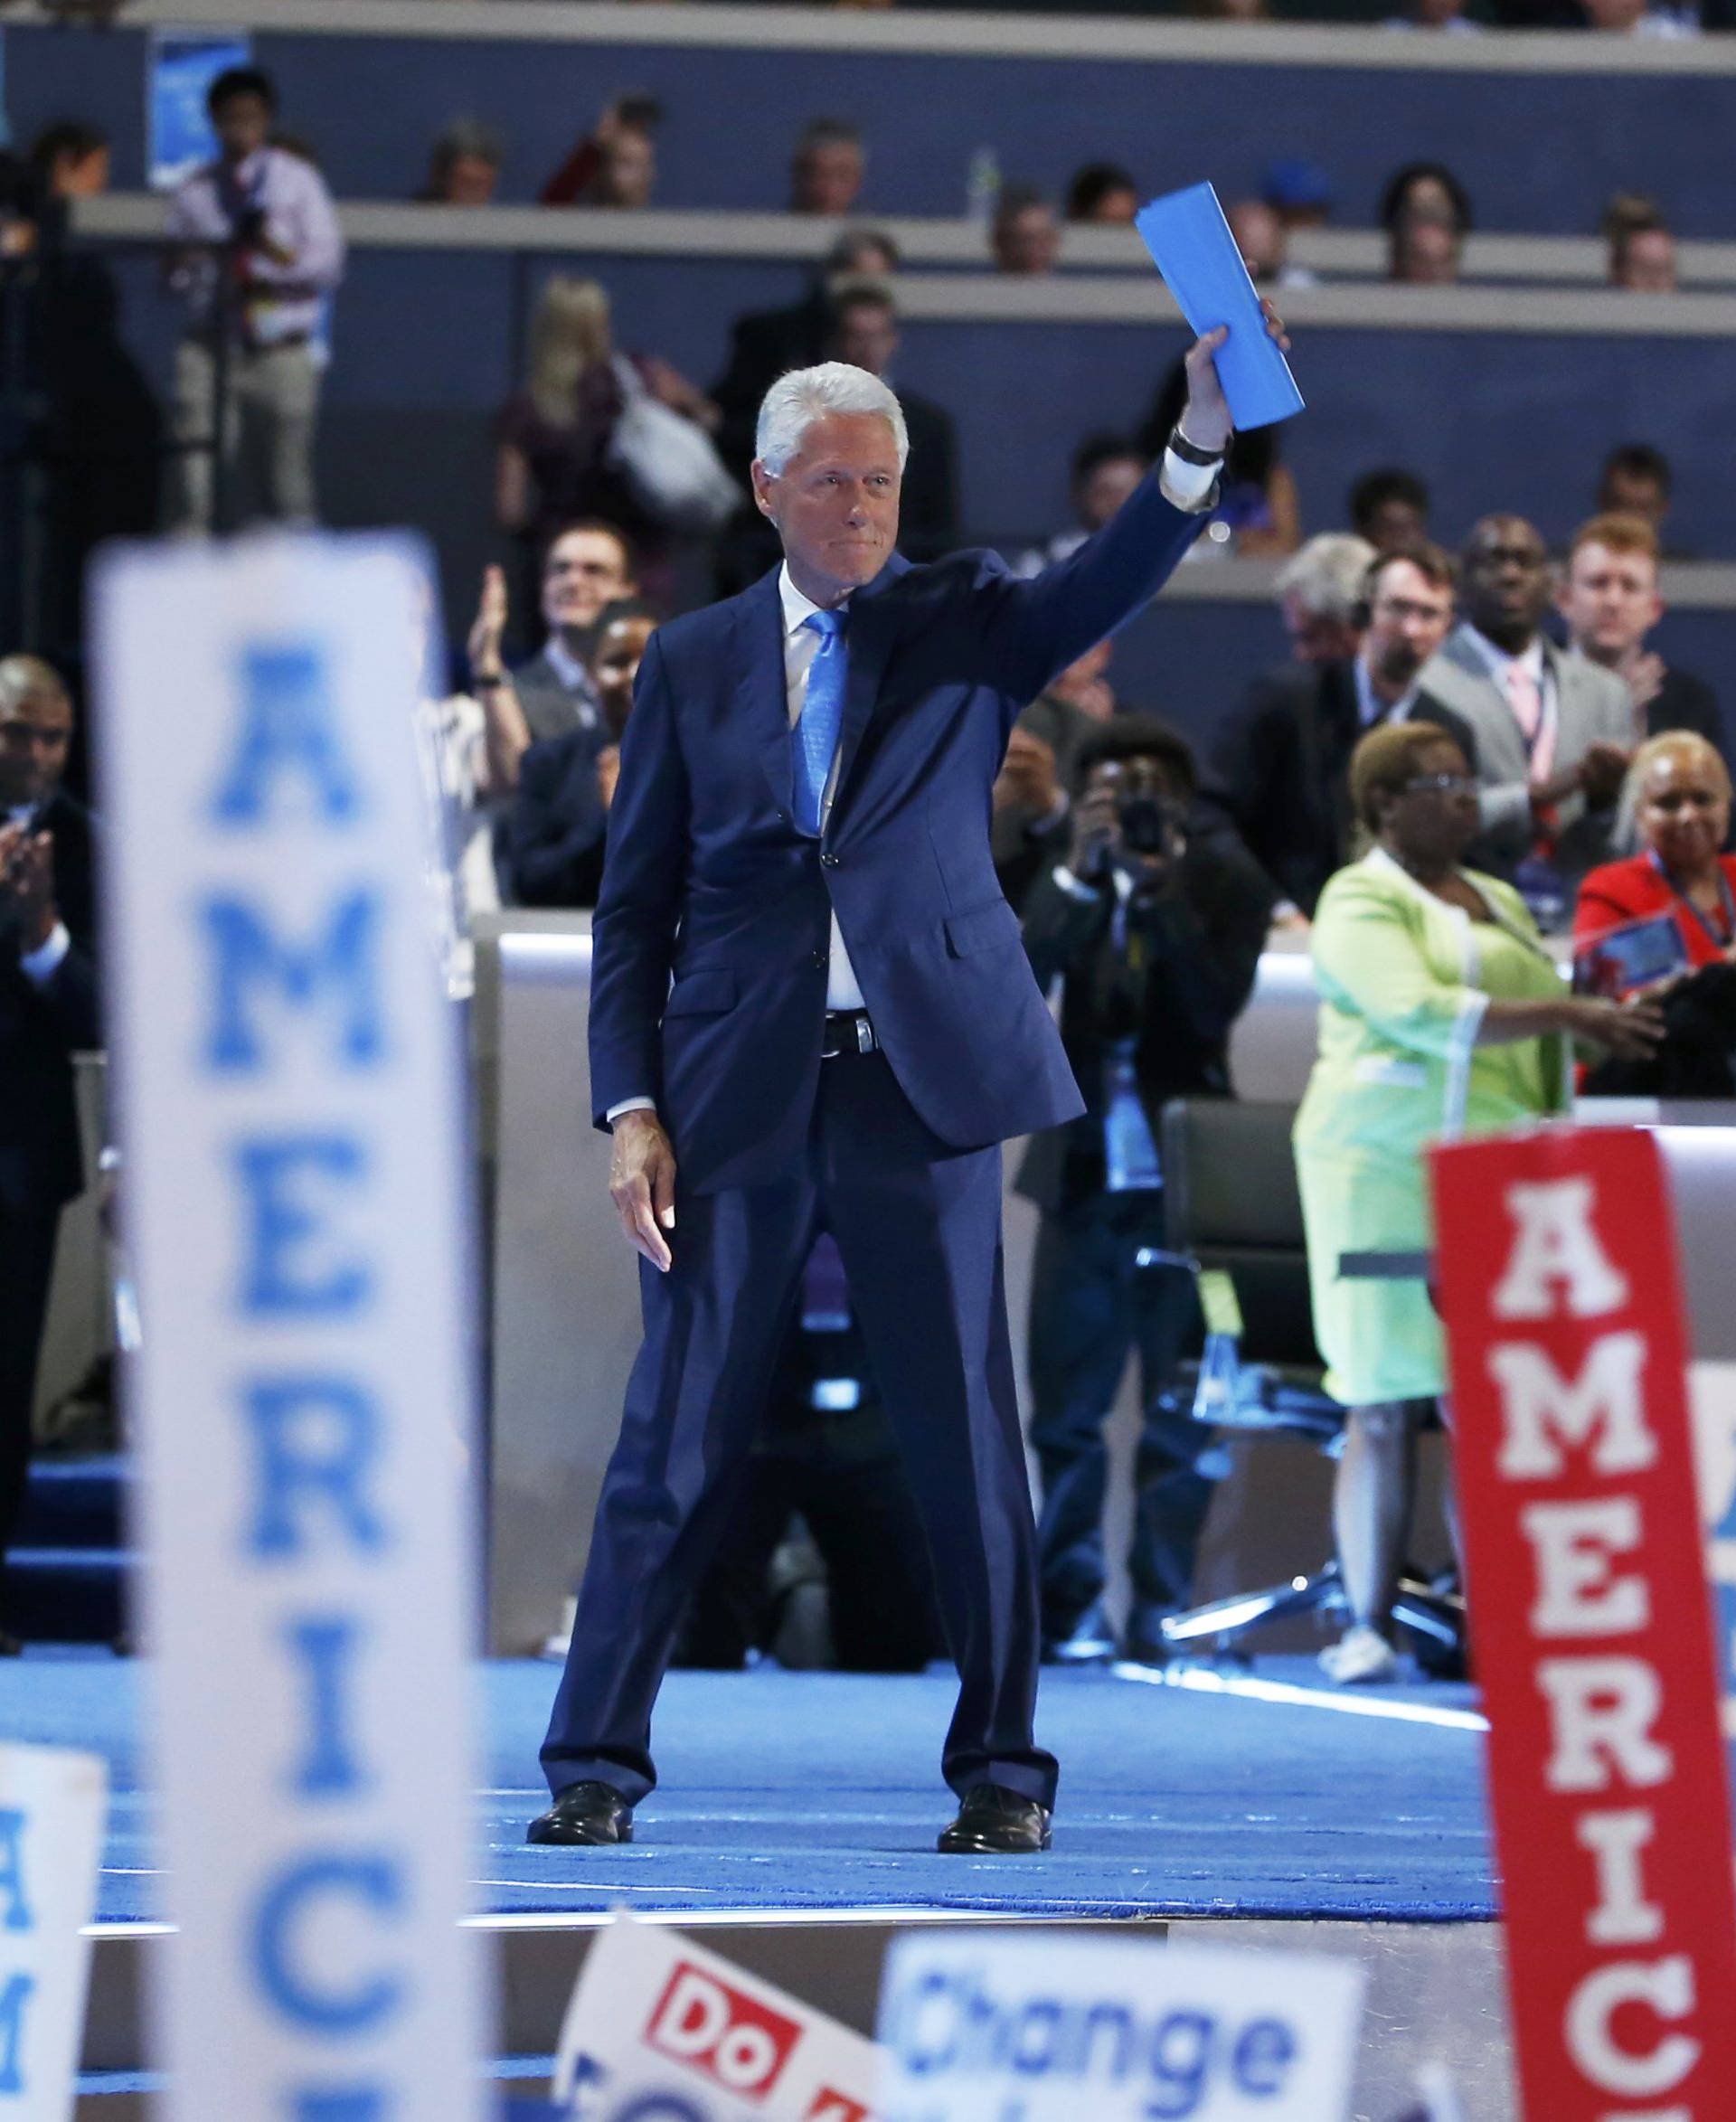 Bill Clinton waves after his speech during the Democratic National Convention in Philadelphia